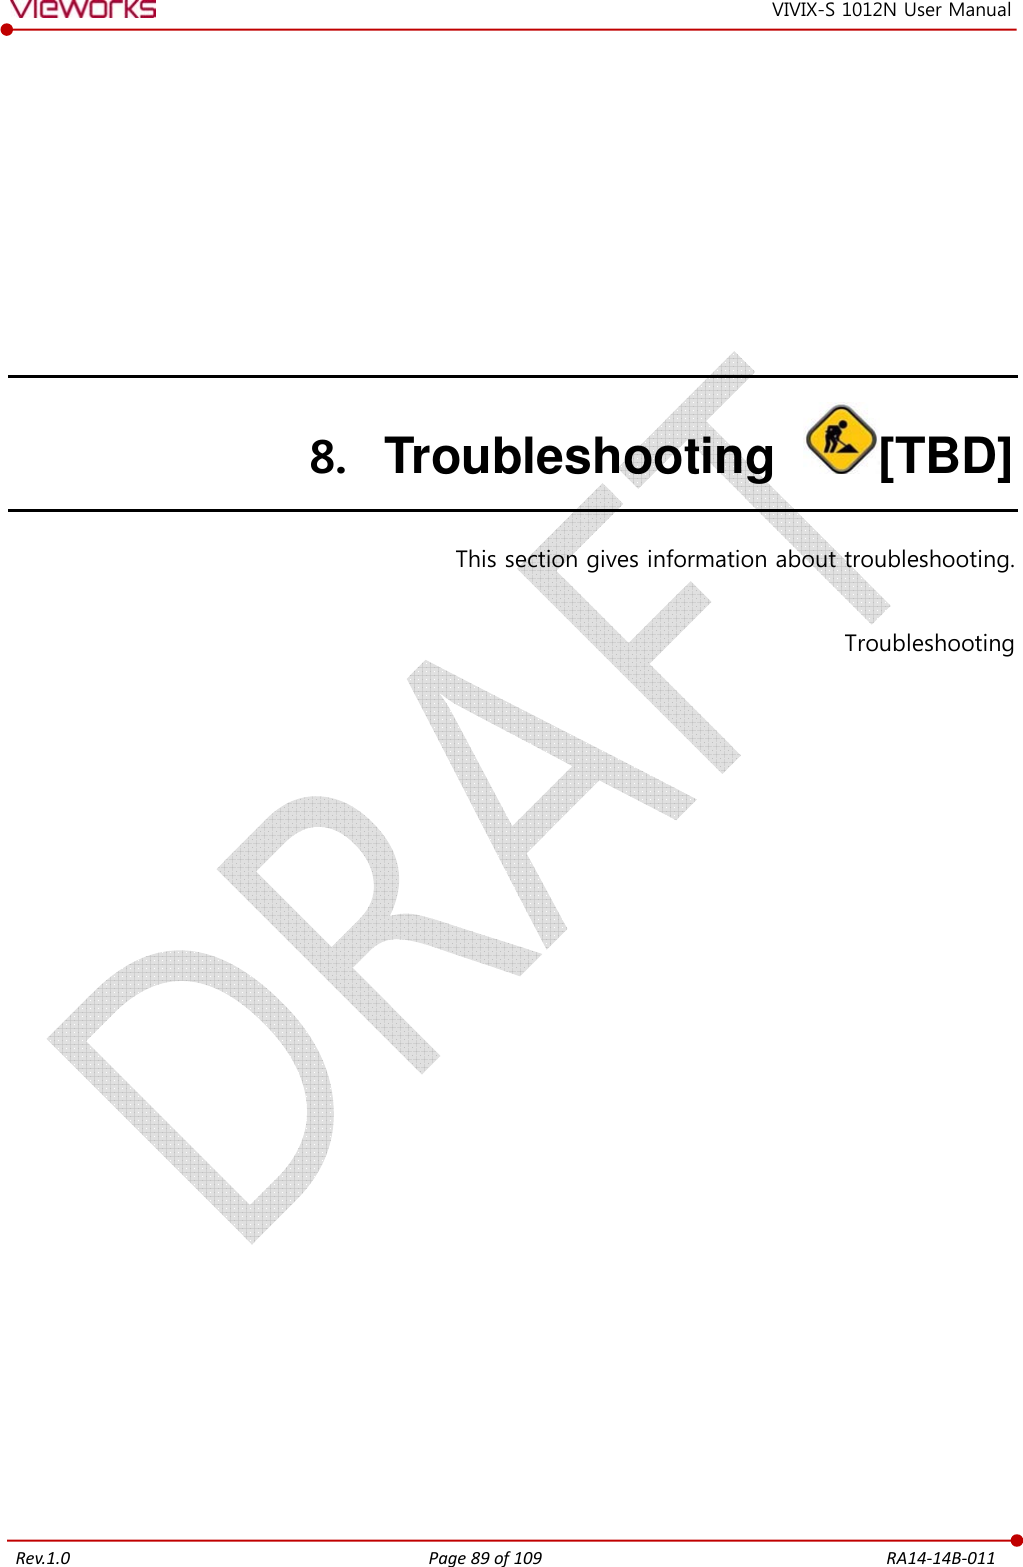   Rev.1.0 Page 89 of 109  RA14-14B-011 VIVIX-S 1012N User Manual 8. Troubleshooting  [TBD]   This section gives information about troubleshooting.  Troubleshooting   